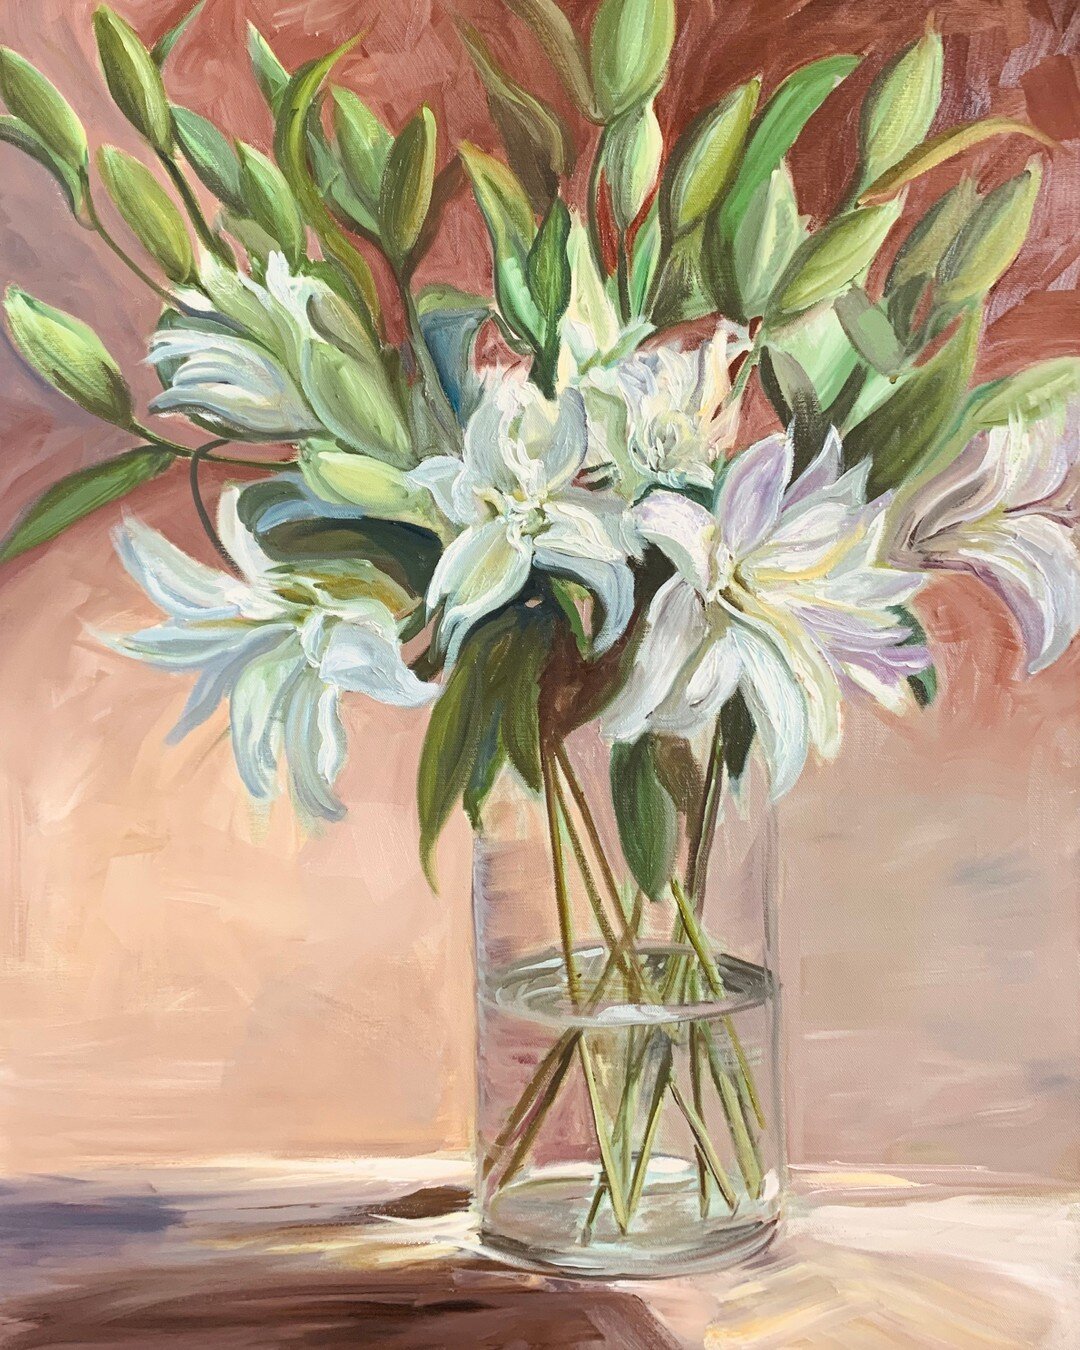 Just finished this painting which is headed up to Boca Raton FL. &quot;Double White Lilies&quot;, oil painting 24&quot; X 36&quot; will be available at the AVDA's 16th Annual Heart of a Woman Luncheon.  This event raises funds to support AVDA's (vict